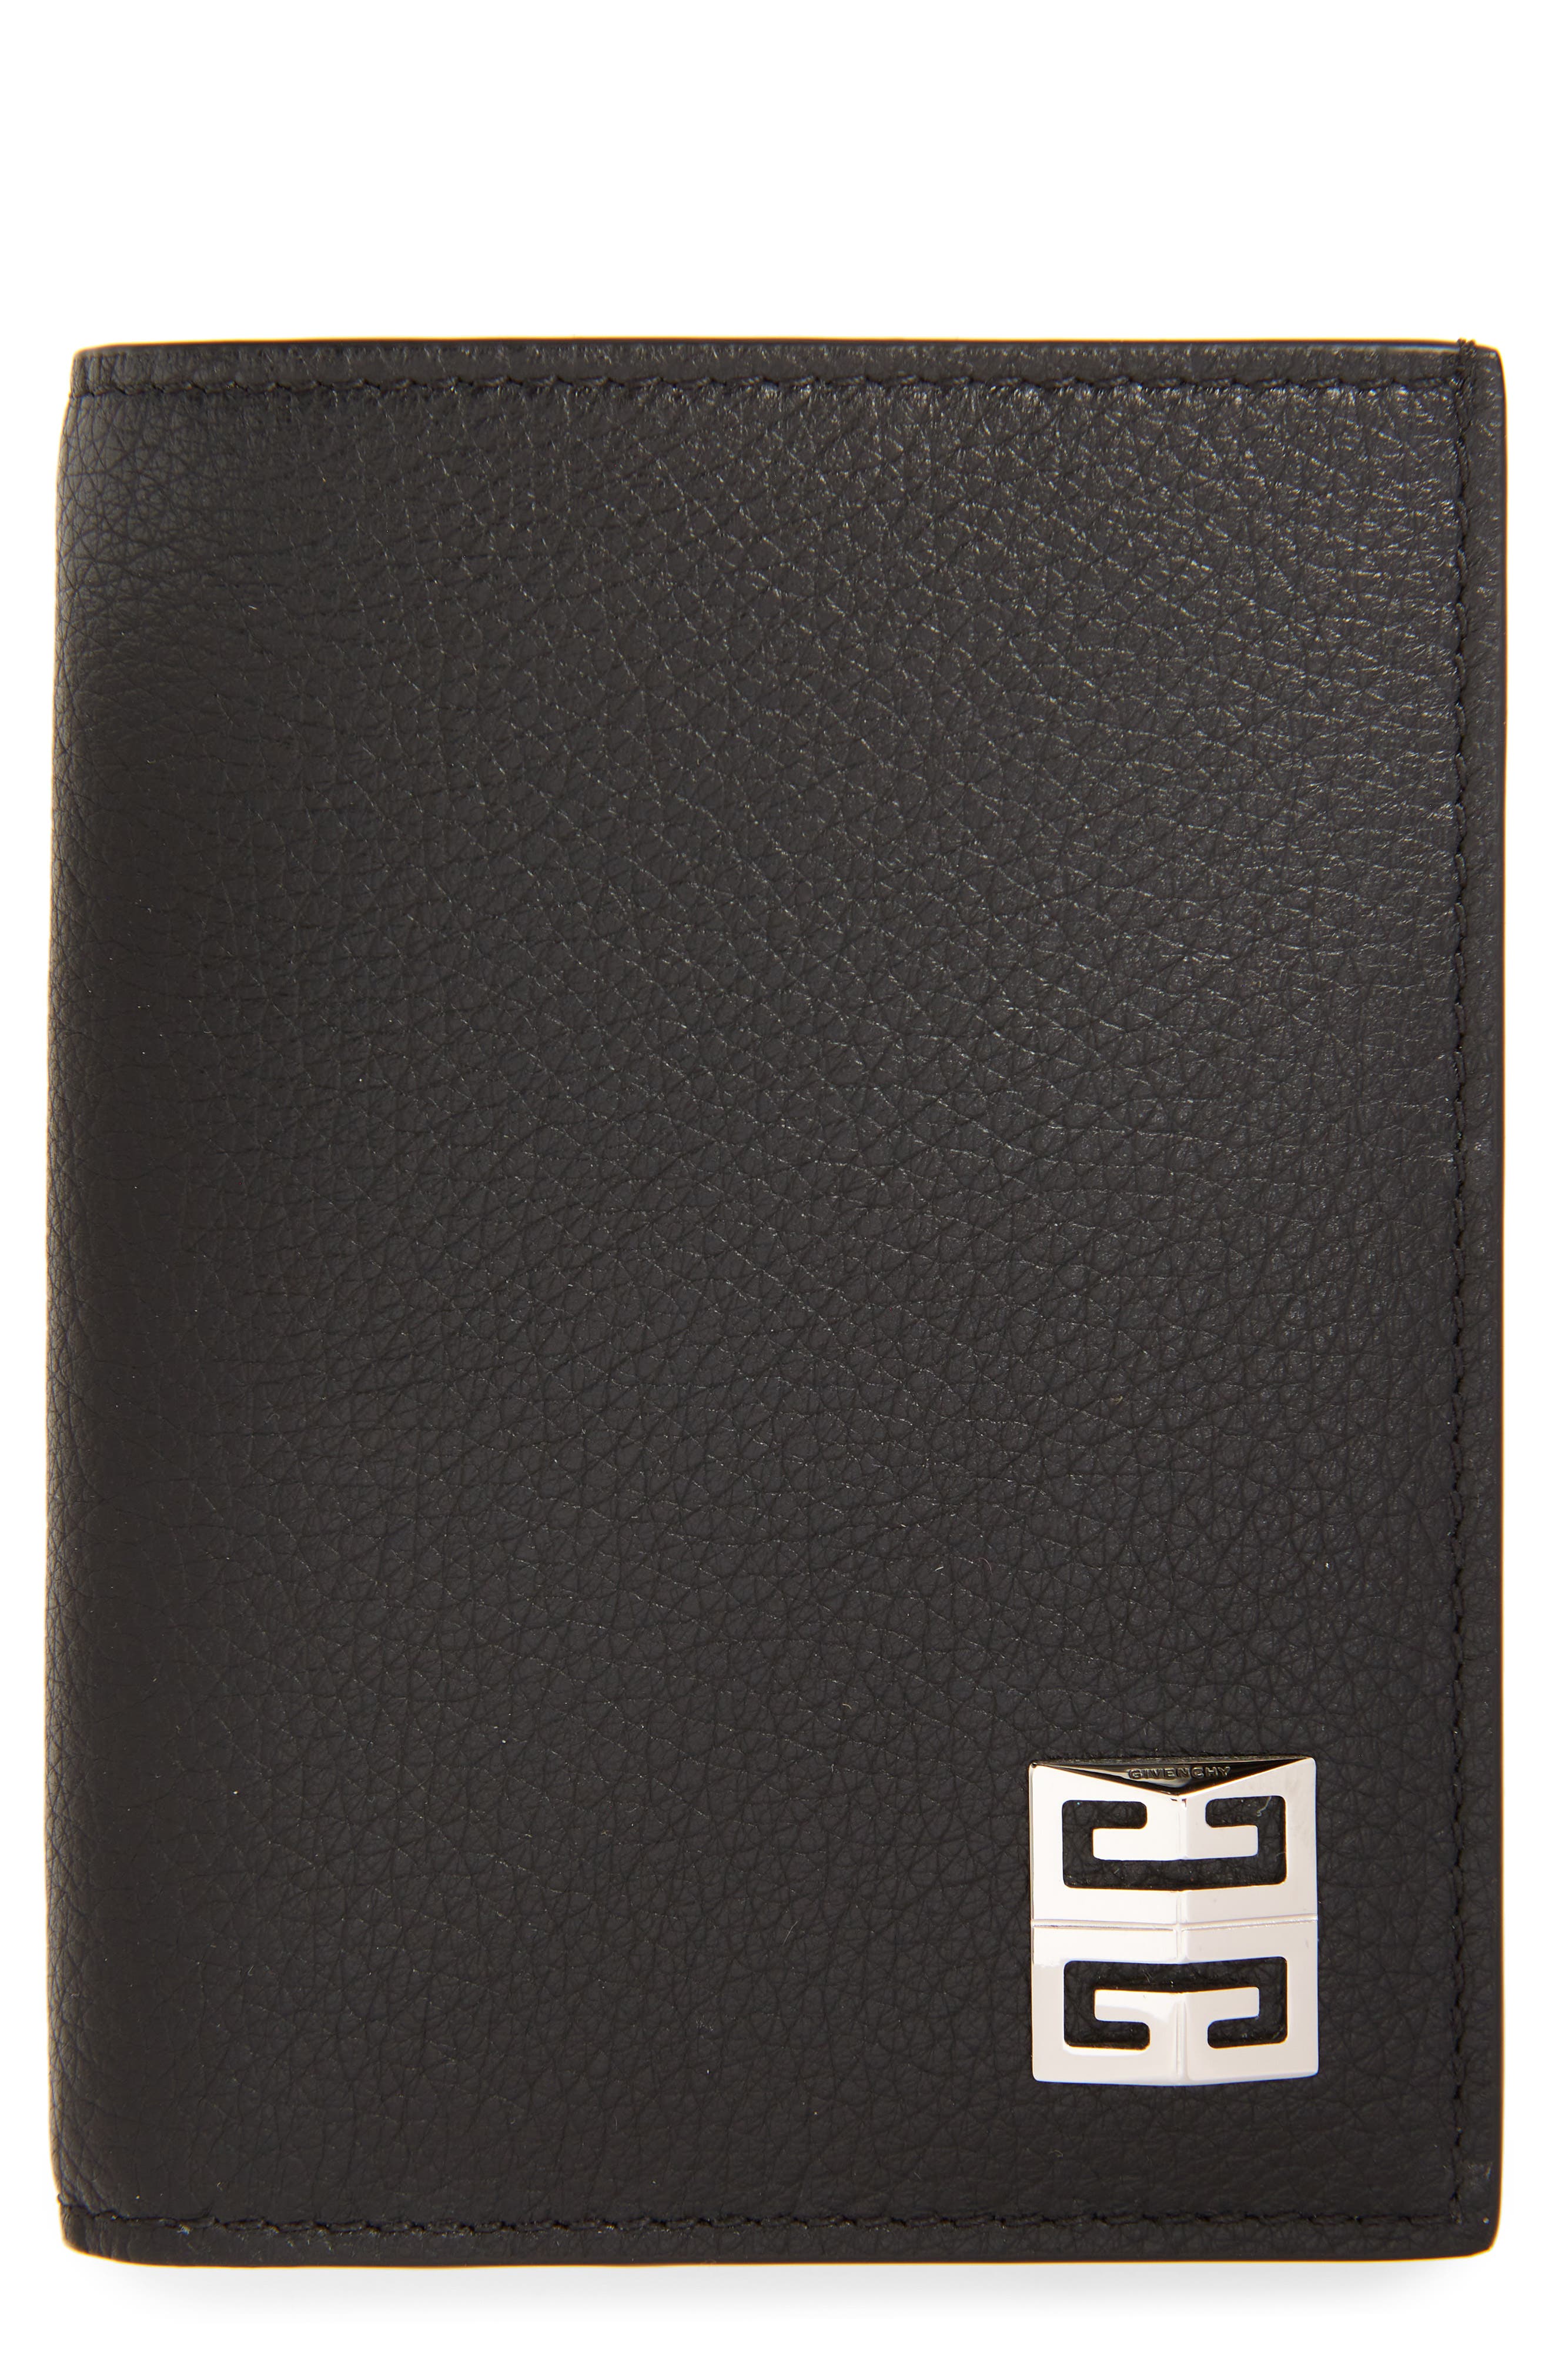 Givenchy 4G Leather Card Holder in Black at Nordstrom